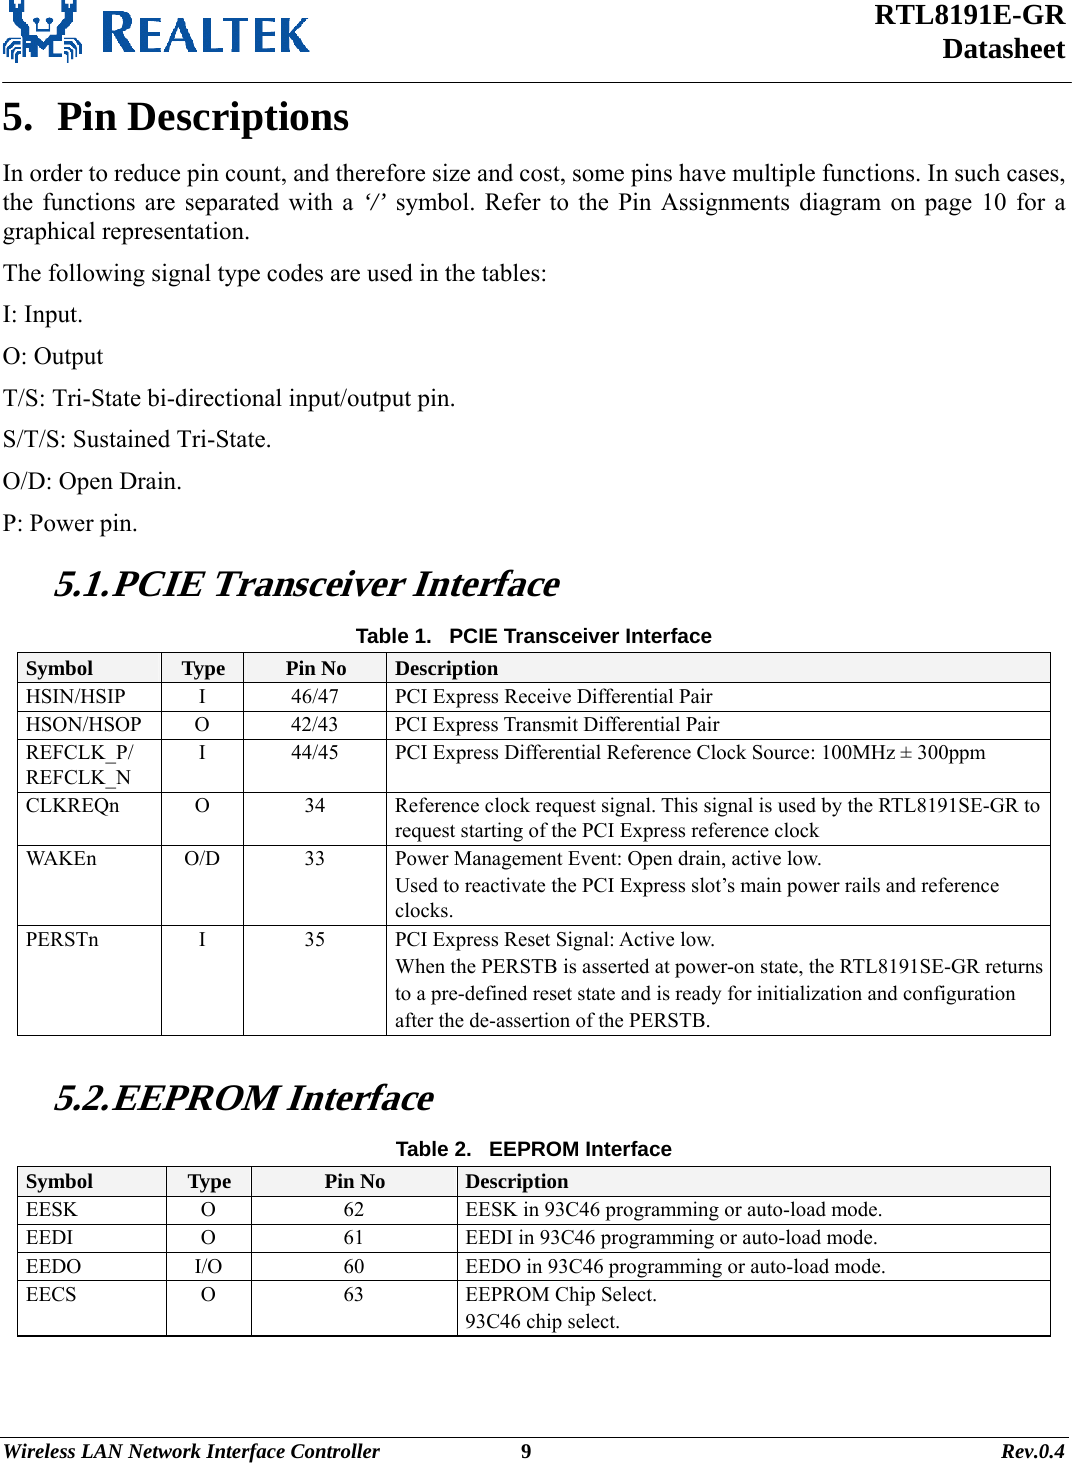  RTL8191E-GR Datasheet Wireless LAN Network Interface Controller                           9                                                                                         Rev.0.4  5.  Pin Descriptions In order to reduce pin count, and therefore size and cost, some pins have multiple functions. In such cases, the functions are separated with a ‘/’ symbol. Refer to the Pin Assignments diagram on page 10 for a graphical representation. The following signal type codes are used in the tables: I: Input. O: Output T/S: Tri-State bi-directional input/output pin. S/T/S: Sustained Tri-State. O/D: Open Drain. P: Power pin. 5.1. PCIE Transceiver Interface Table 1.   PCIE Transceiver Interface Symbol  Type  Pin No  Description HSIN/HSIP I  46/47 PCI Express Receive Differential Pair HSON/HSOP  O  42/43  PCI Express Transmit Differential Pair REFCLK_P/ REFCLK_N I  44/45  PCI Express Differential Reference Clock Source: 100MHz ± 300ppm CLKREQn  O  34  Reference clock request signal. This signal is used by the RTL8191SE-GR to request starting of the PCI Express reference clock WAKEn  O/D  33  Power Management Event: Open drain, active low. Used to reactivate the PCI Express slot’s main power rails and reference clocks. PERSTn  I  35  PCI Express Reset Signal: Active low.   When the PERSTB is asserted at power-on state, the RTL8191SE-GR returnsto a pre-defined reset state and is ready for initialization and configuration  after the de-assertion of the PERSTB.  5.2. EEPROM Interface Table 2.   EEPROM Interface Symbol  Type  Pin No  Description EESK  O  62  EESK in 93C46 programming or auto-load mode. EEDI  O  61  EEDI in 93C46 programming or auto-load mode. EEDO  I/O  60  EEDO in 93C46 programming or auto-load mode. EECS  O  63  EEPROM Chip Select. 93C46 chip select.  